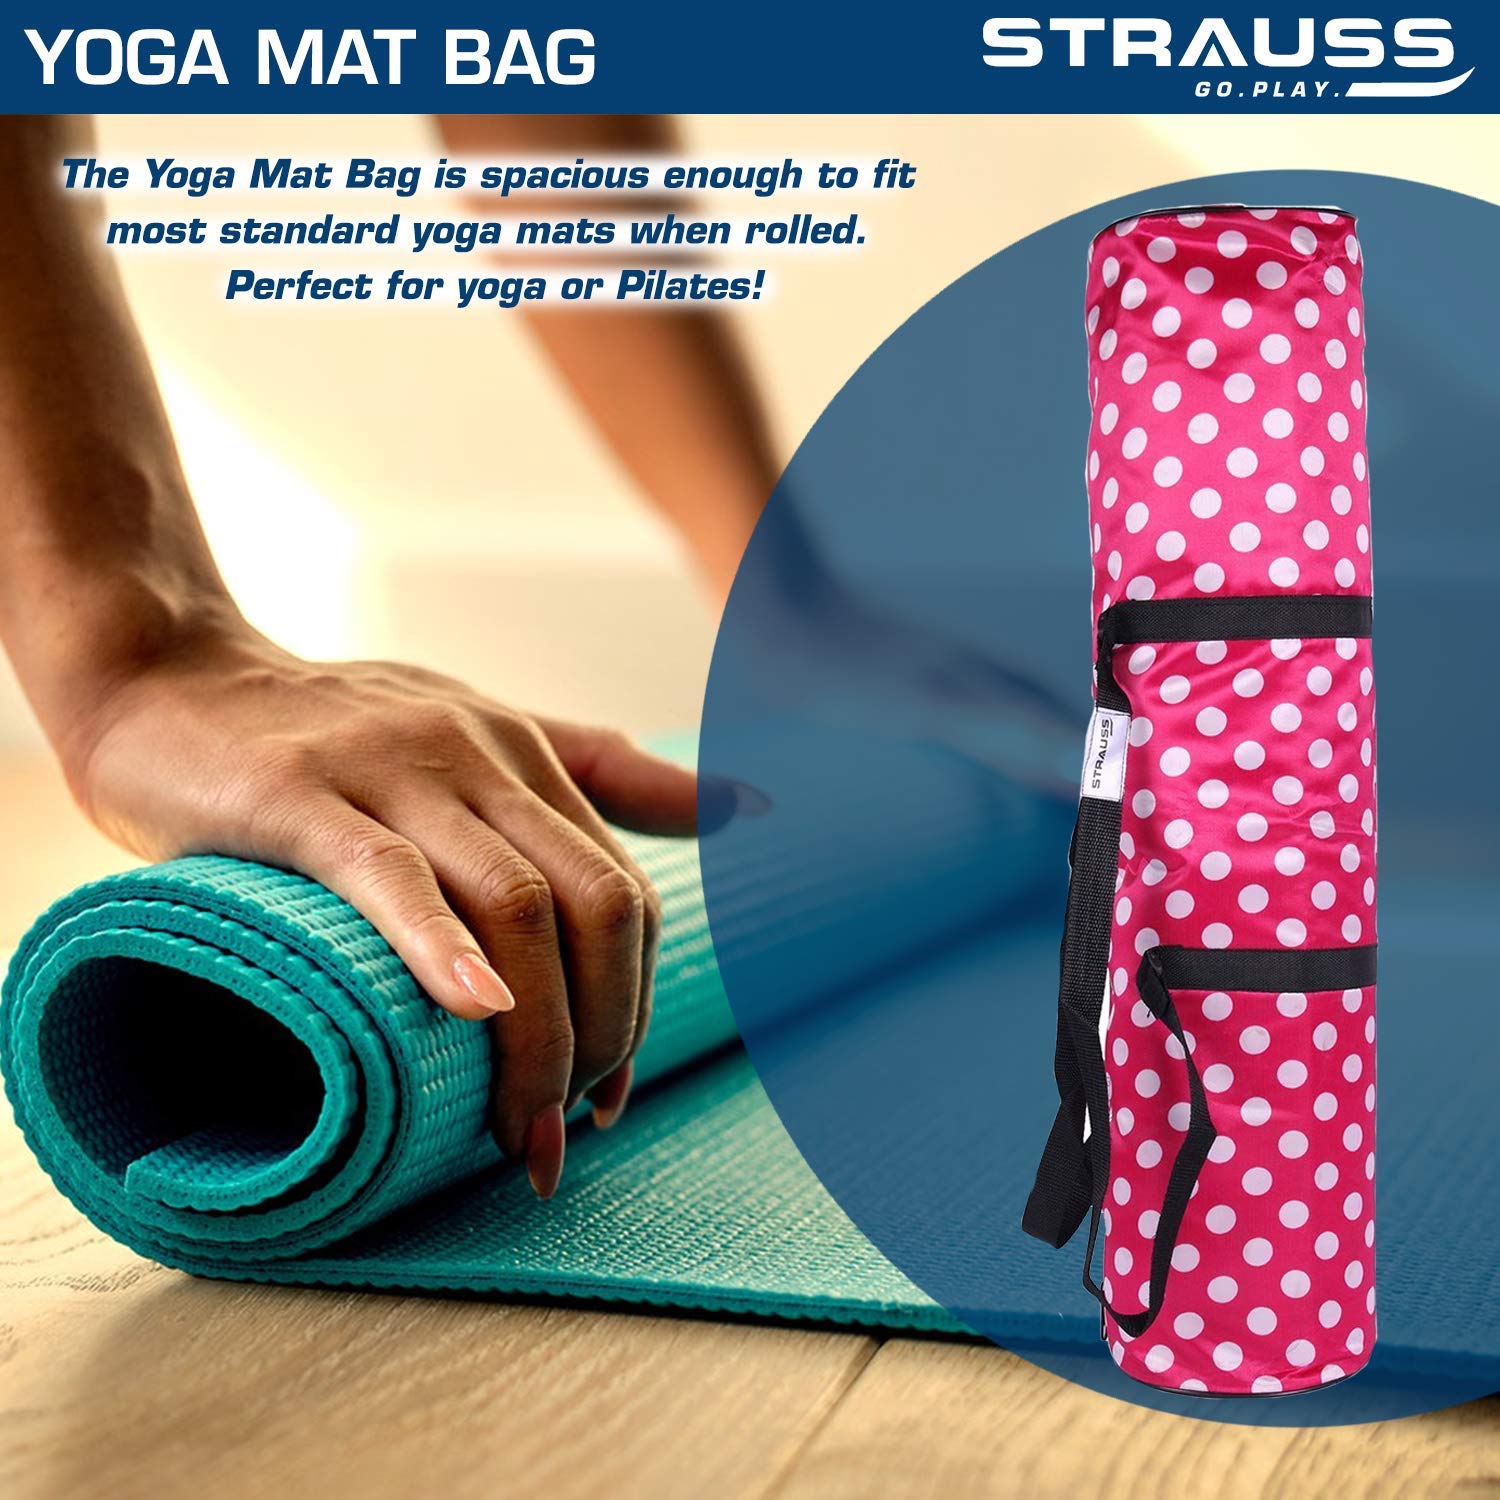 Strauss Yoga Mat 6MM,(Floral Blue) and Yoga Shoes, (Black)